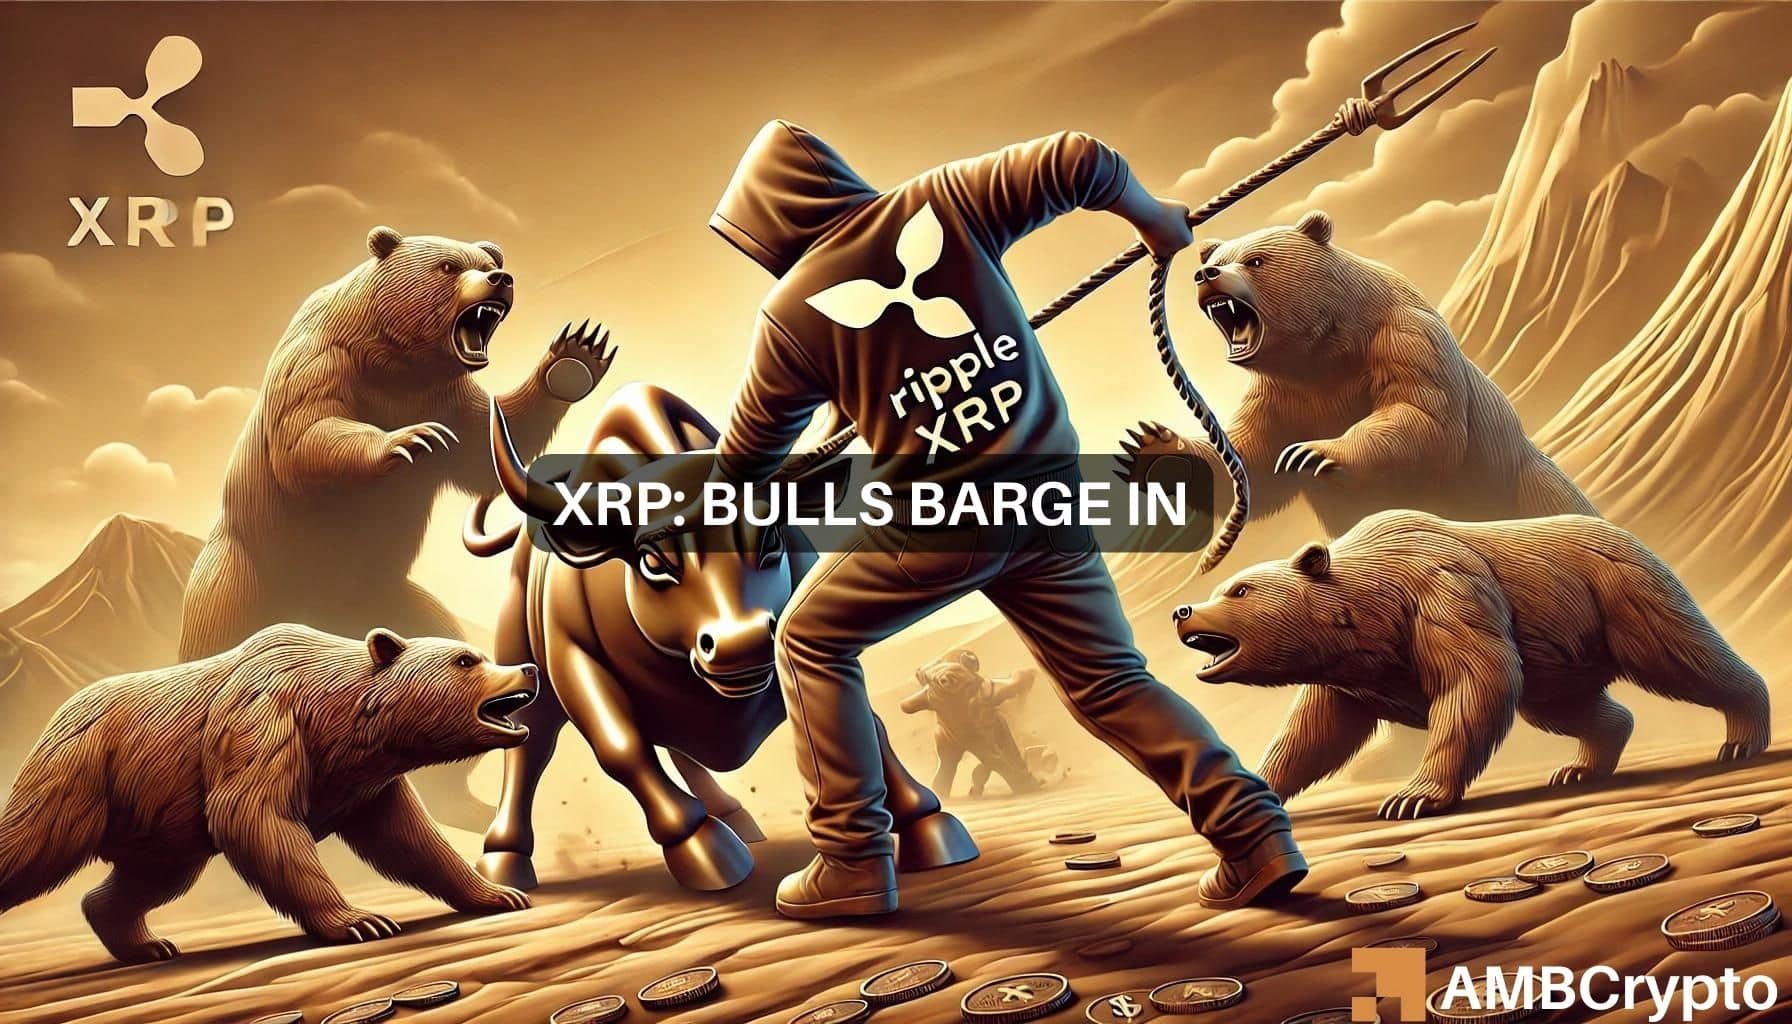 Why XRP’s recent price surge failed to break its bearish trend